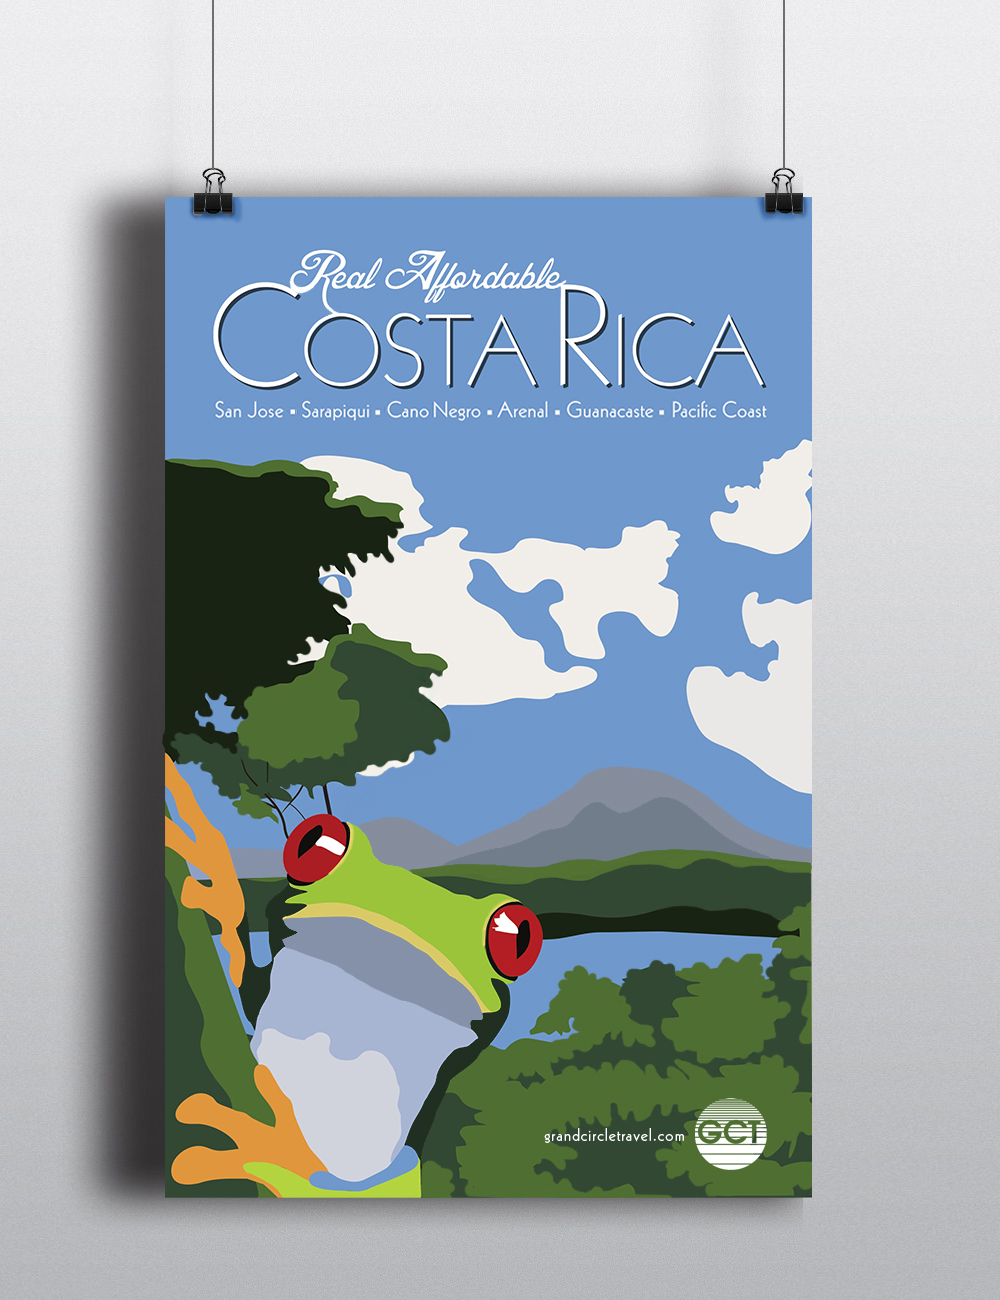 Grand circle travel Costa Rica vintage poster travel poster